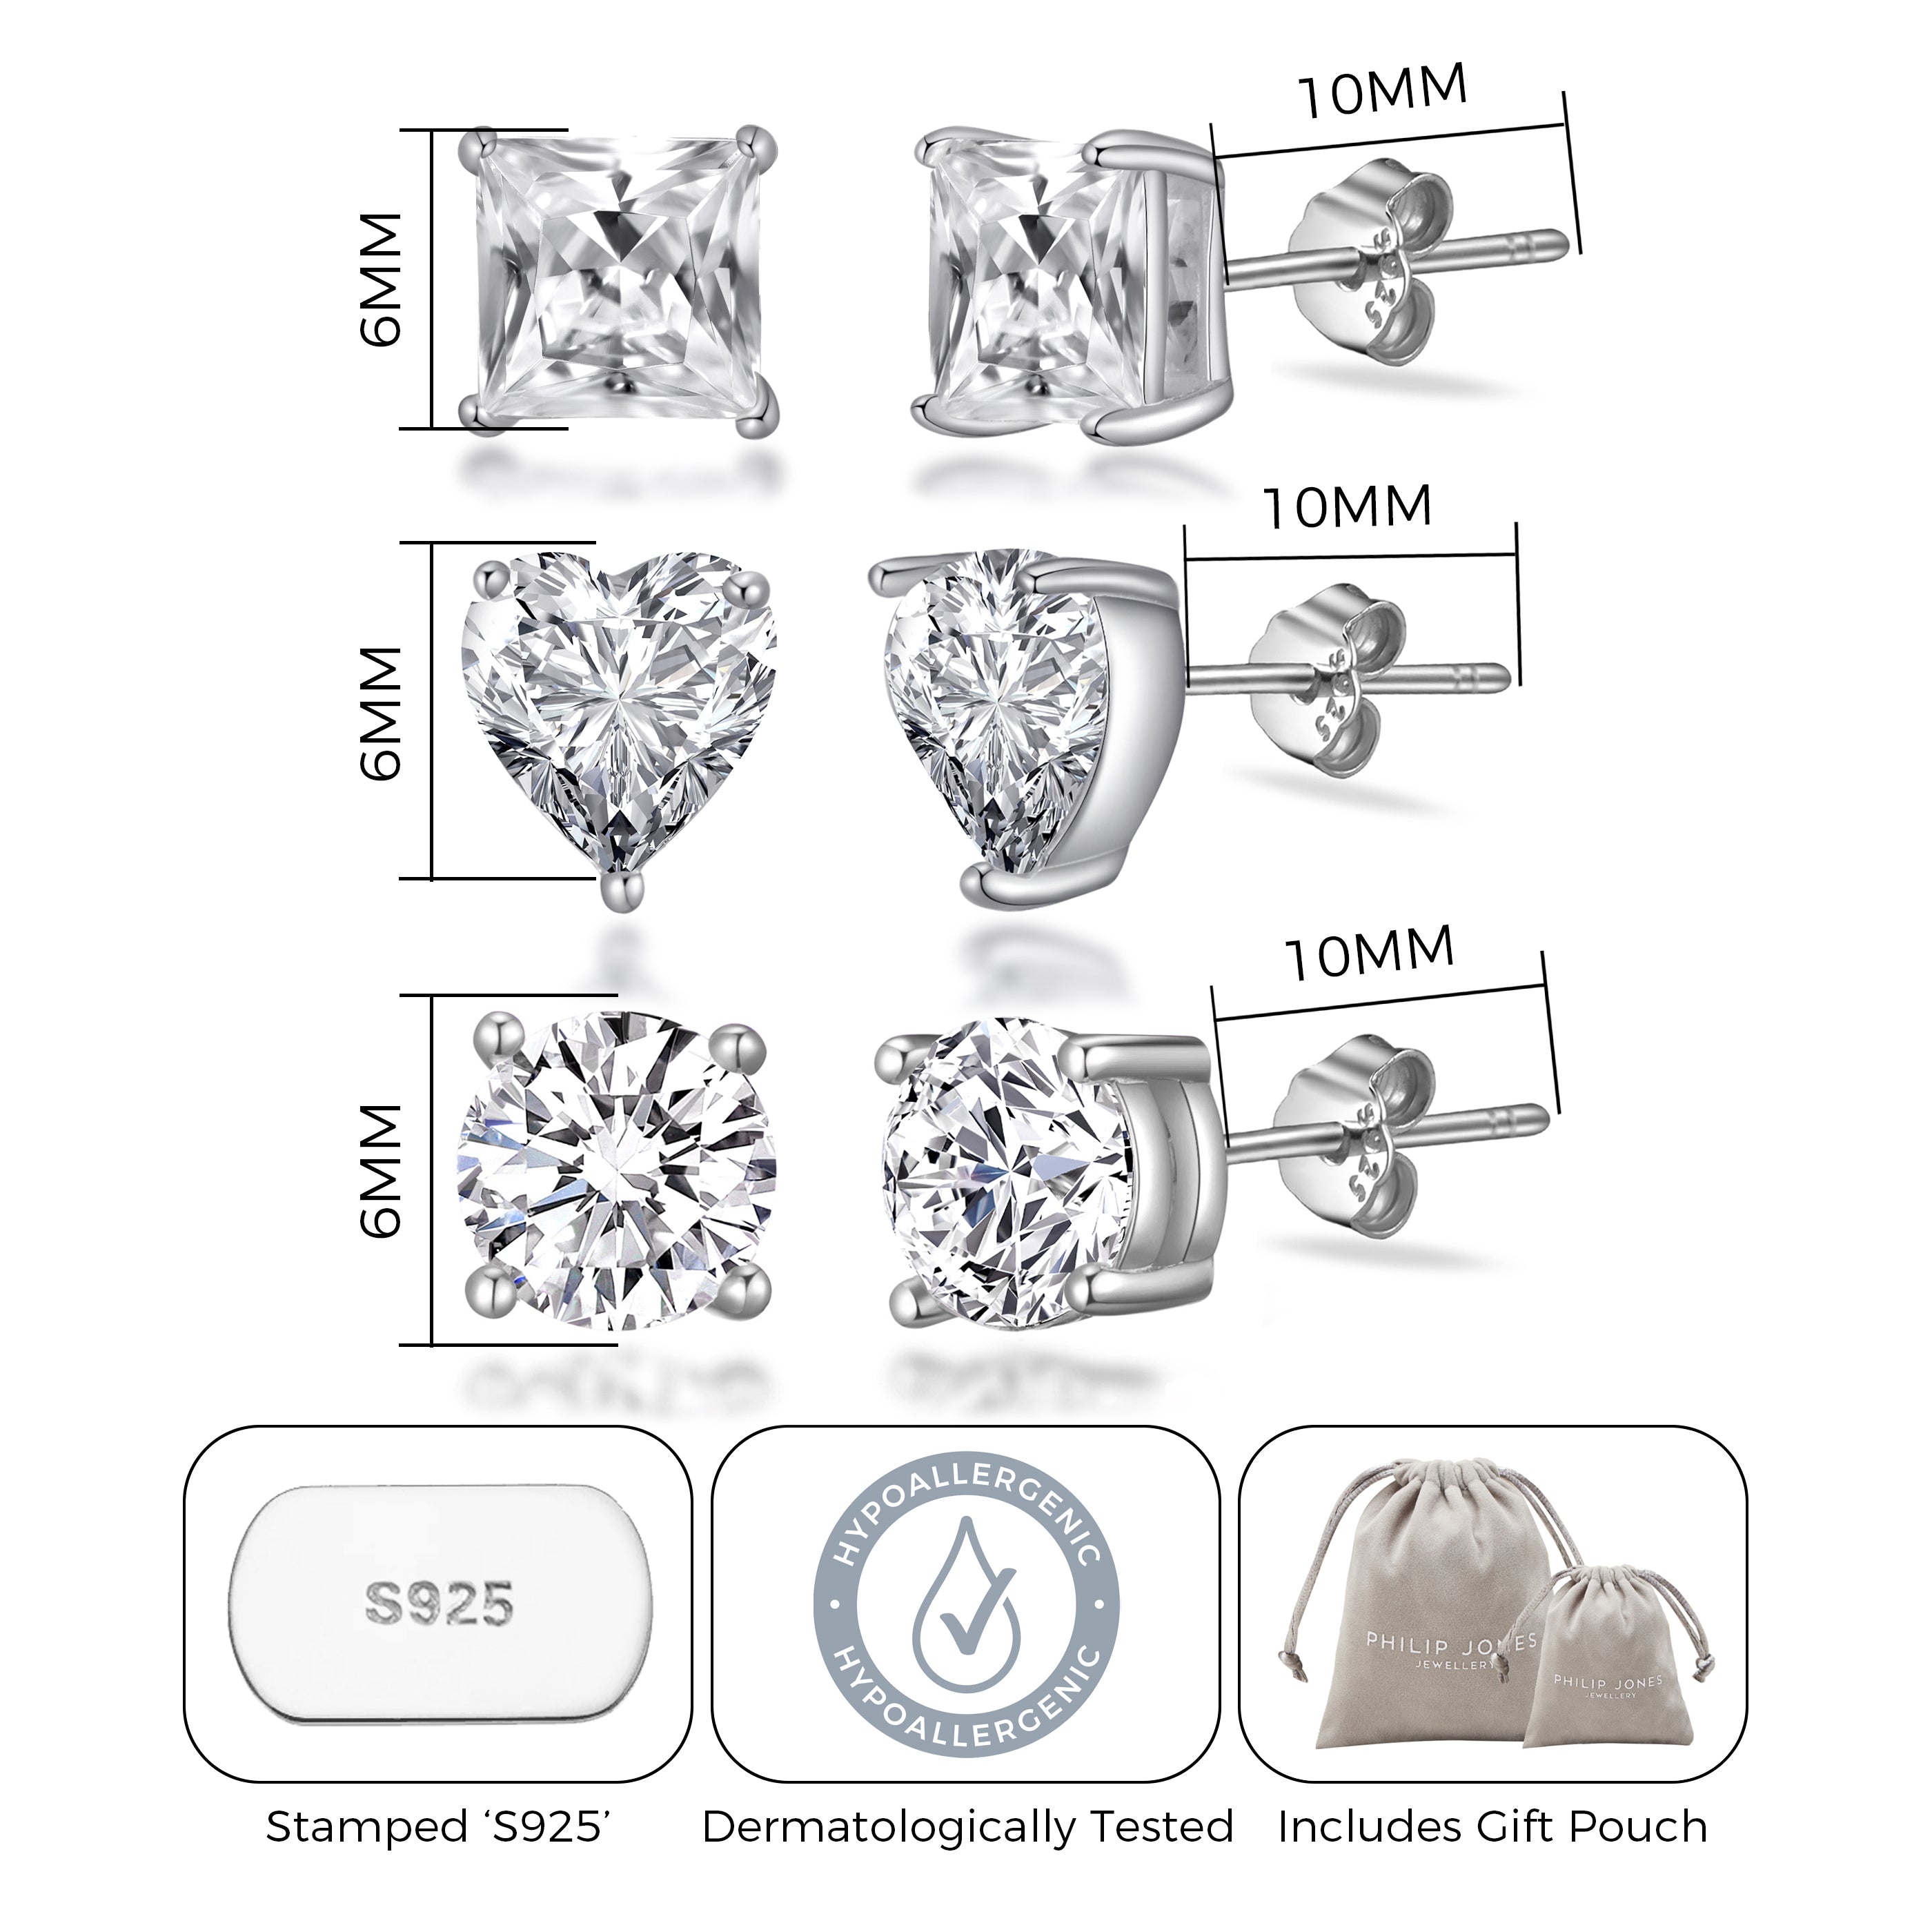 3 Pairs of Sterling Silver Shaped Earrings Created with Zircondia® Crystals